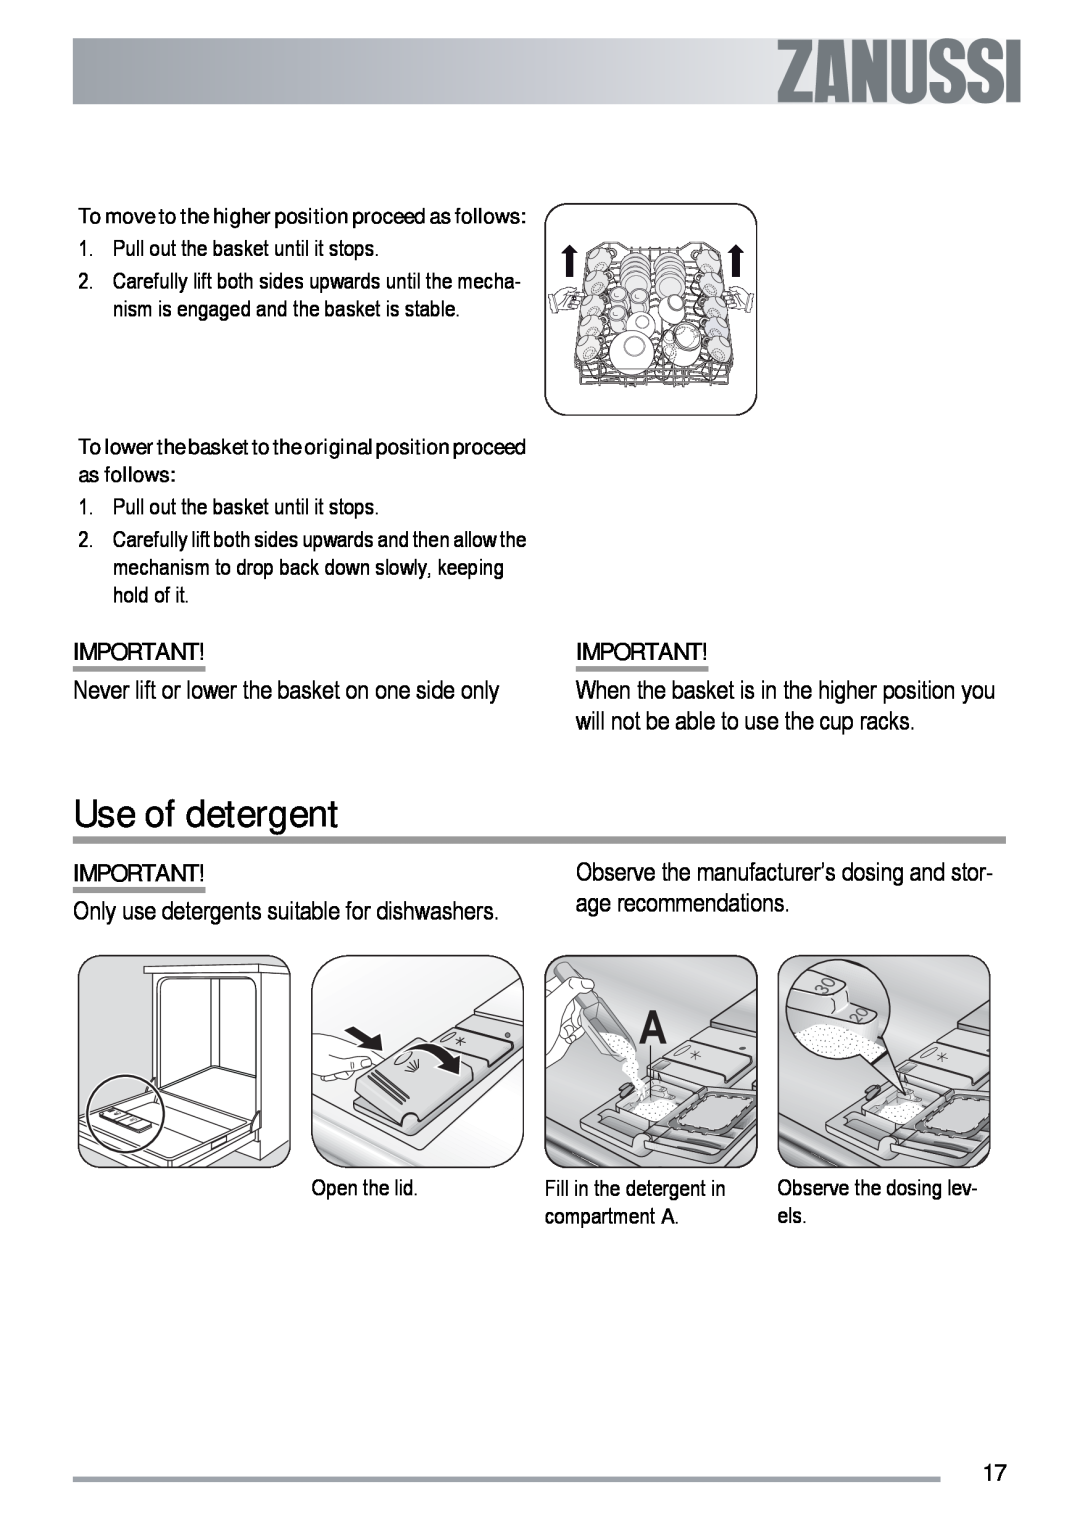 Zanussi ZDT 420 user manual Use of detergent, Observe the manufacturer’s dosing and stor- age recommendations 